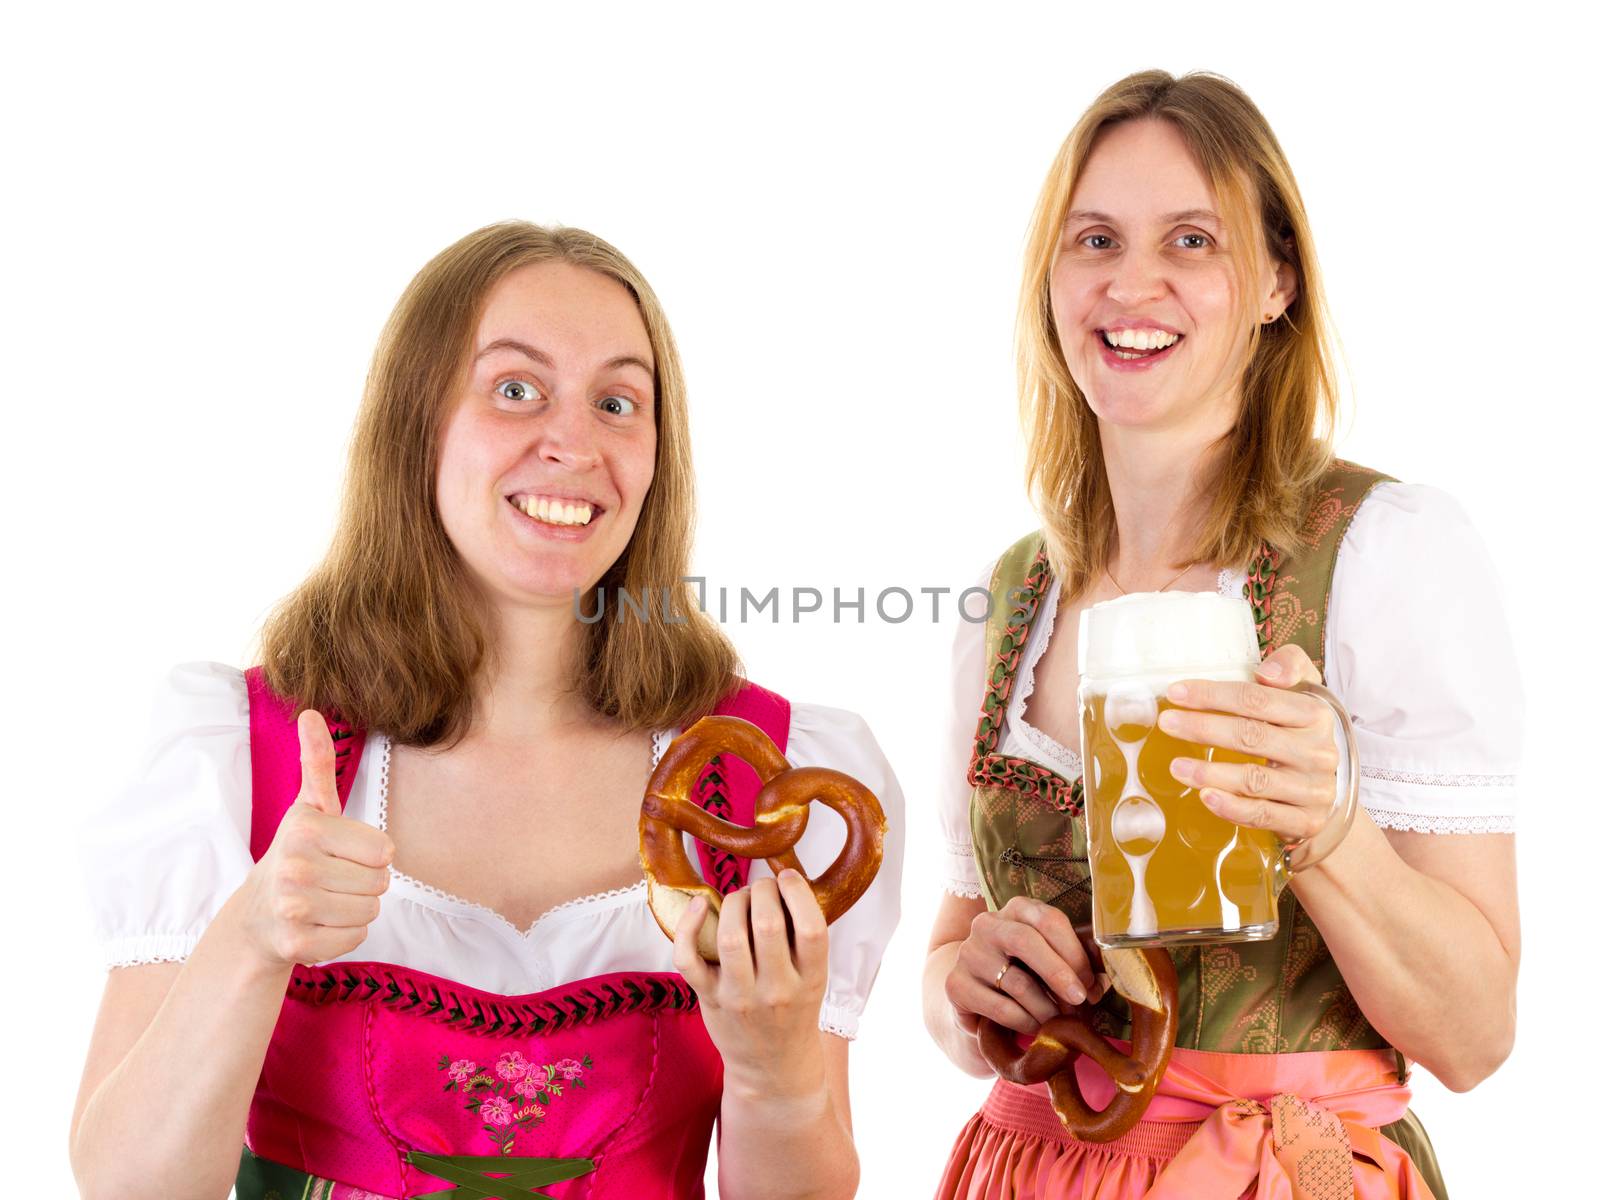 Woman with pretzel showing thumb up